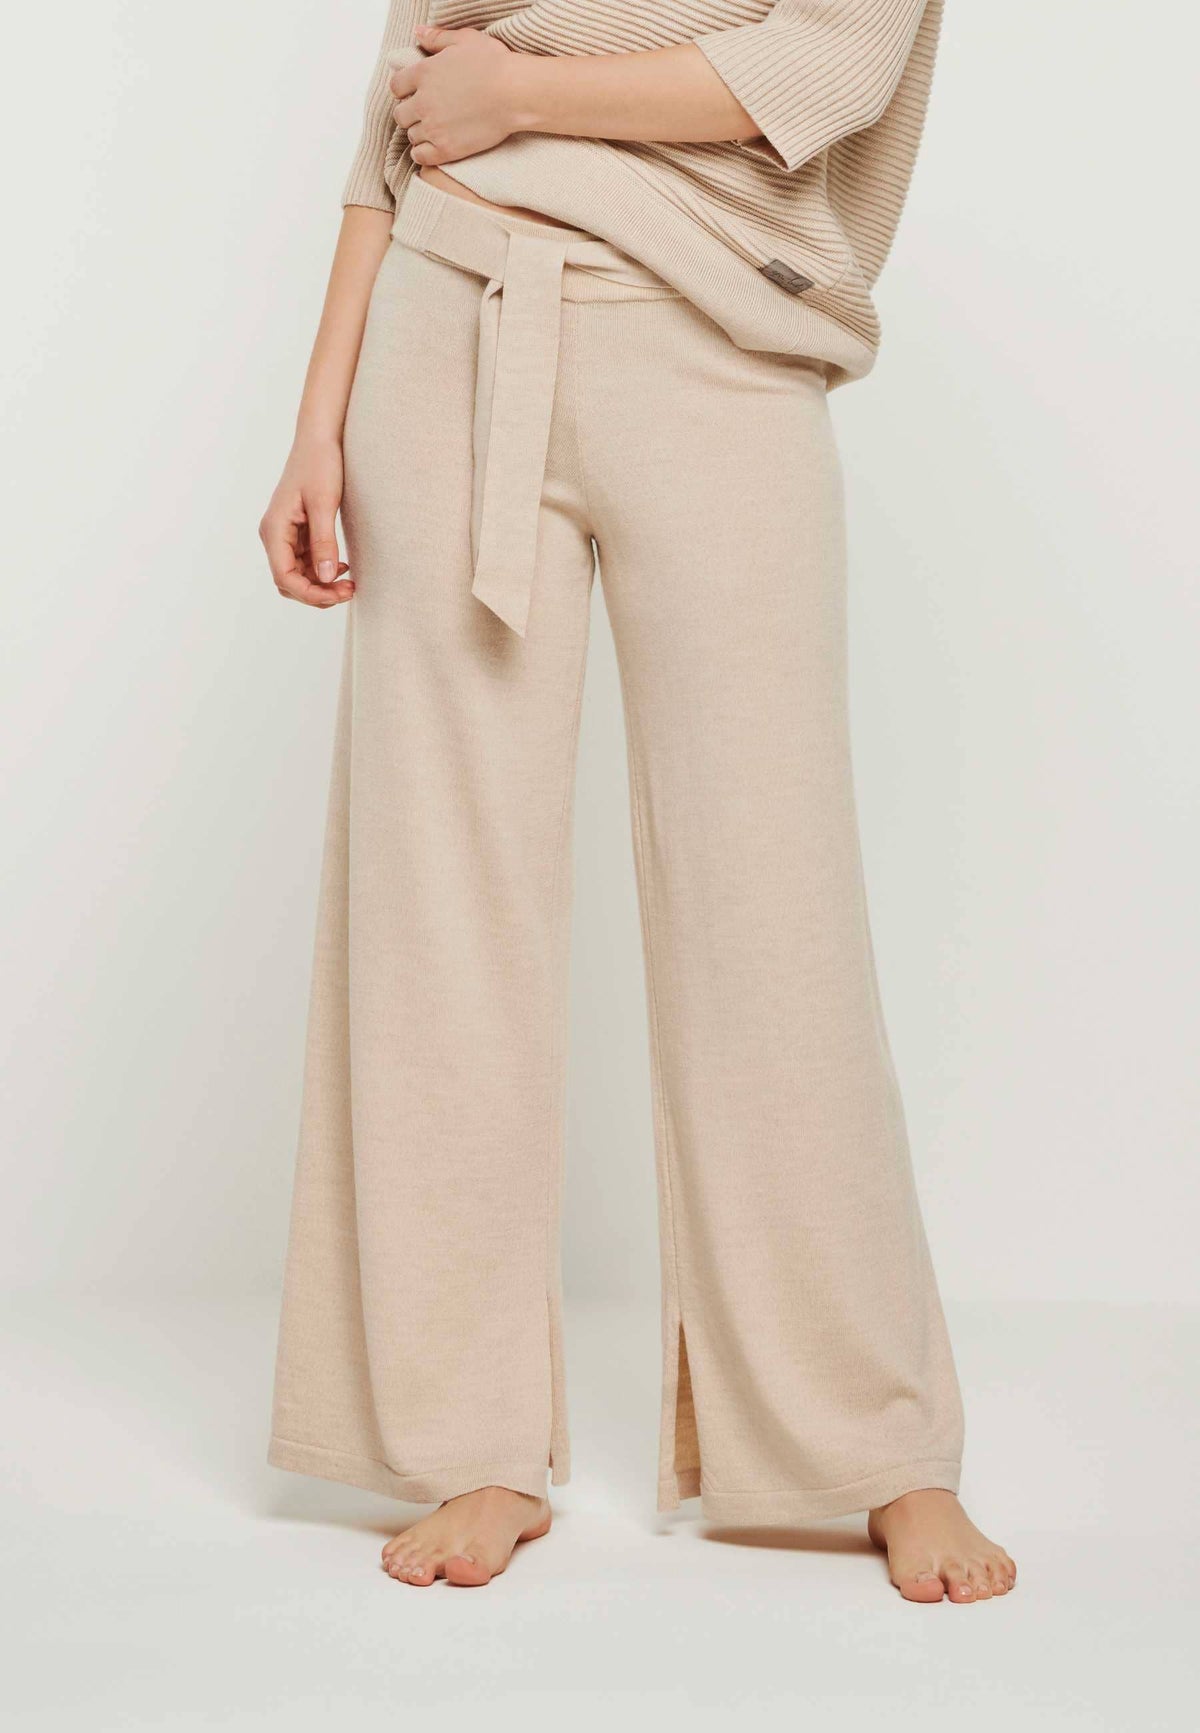 PANTS BAILEY - Wide Relaxing Pants for Women: XS / Taupe